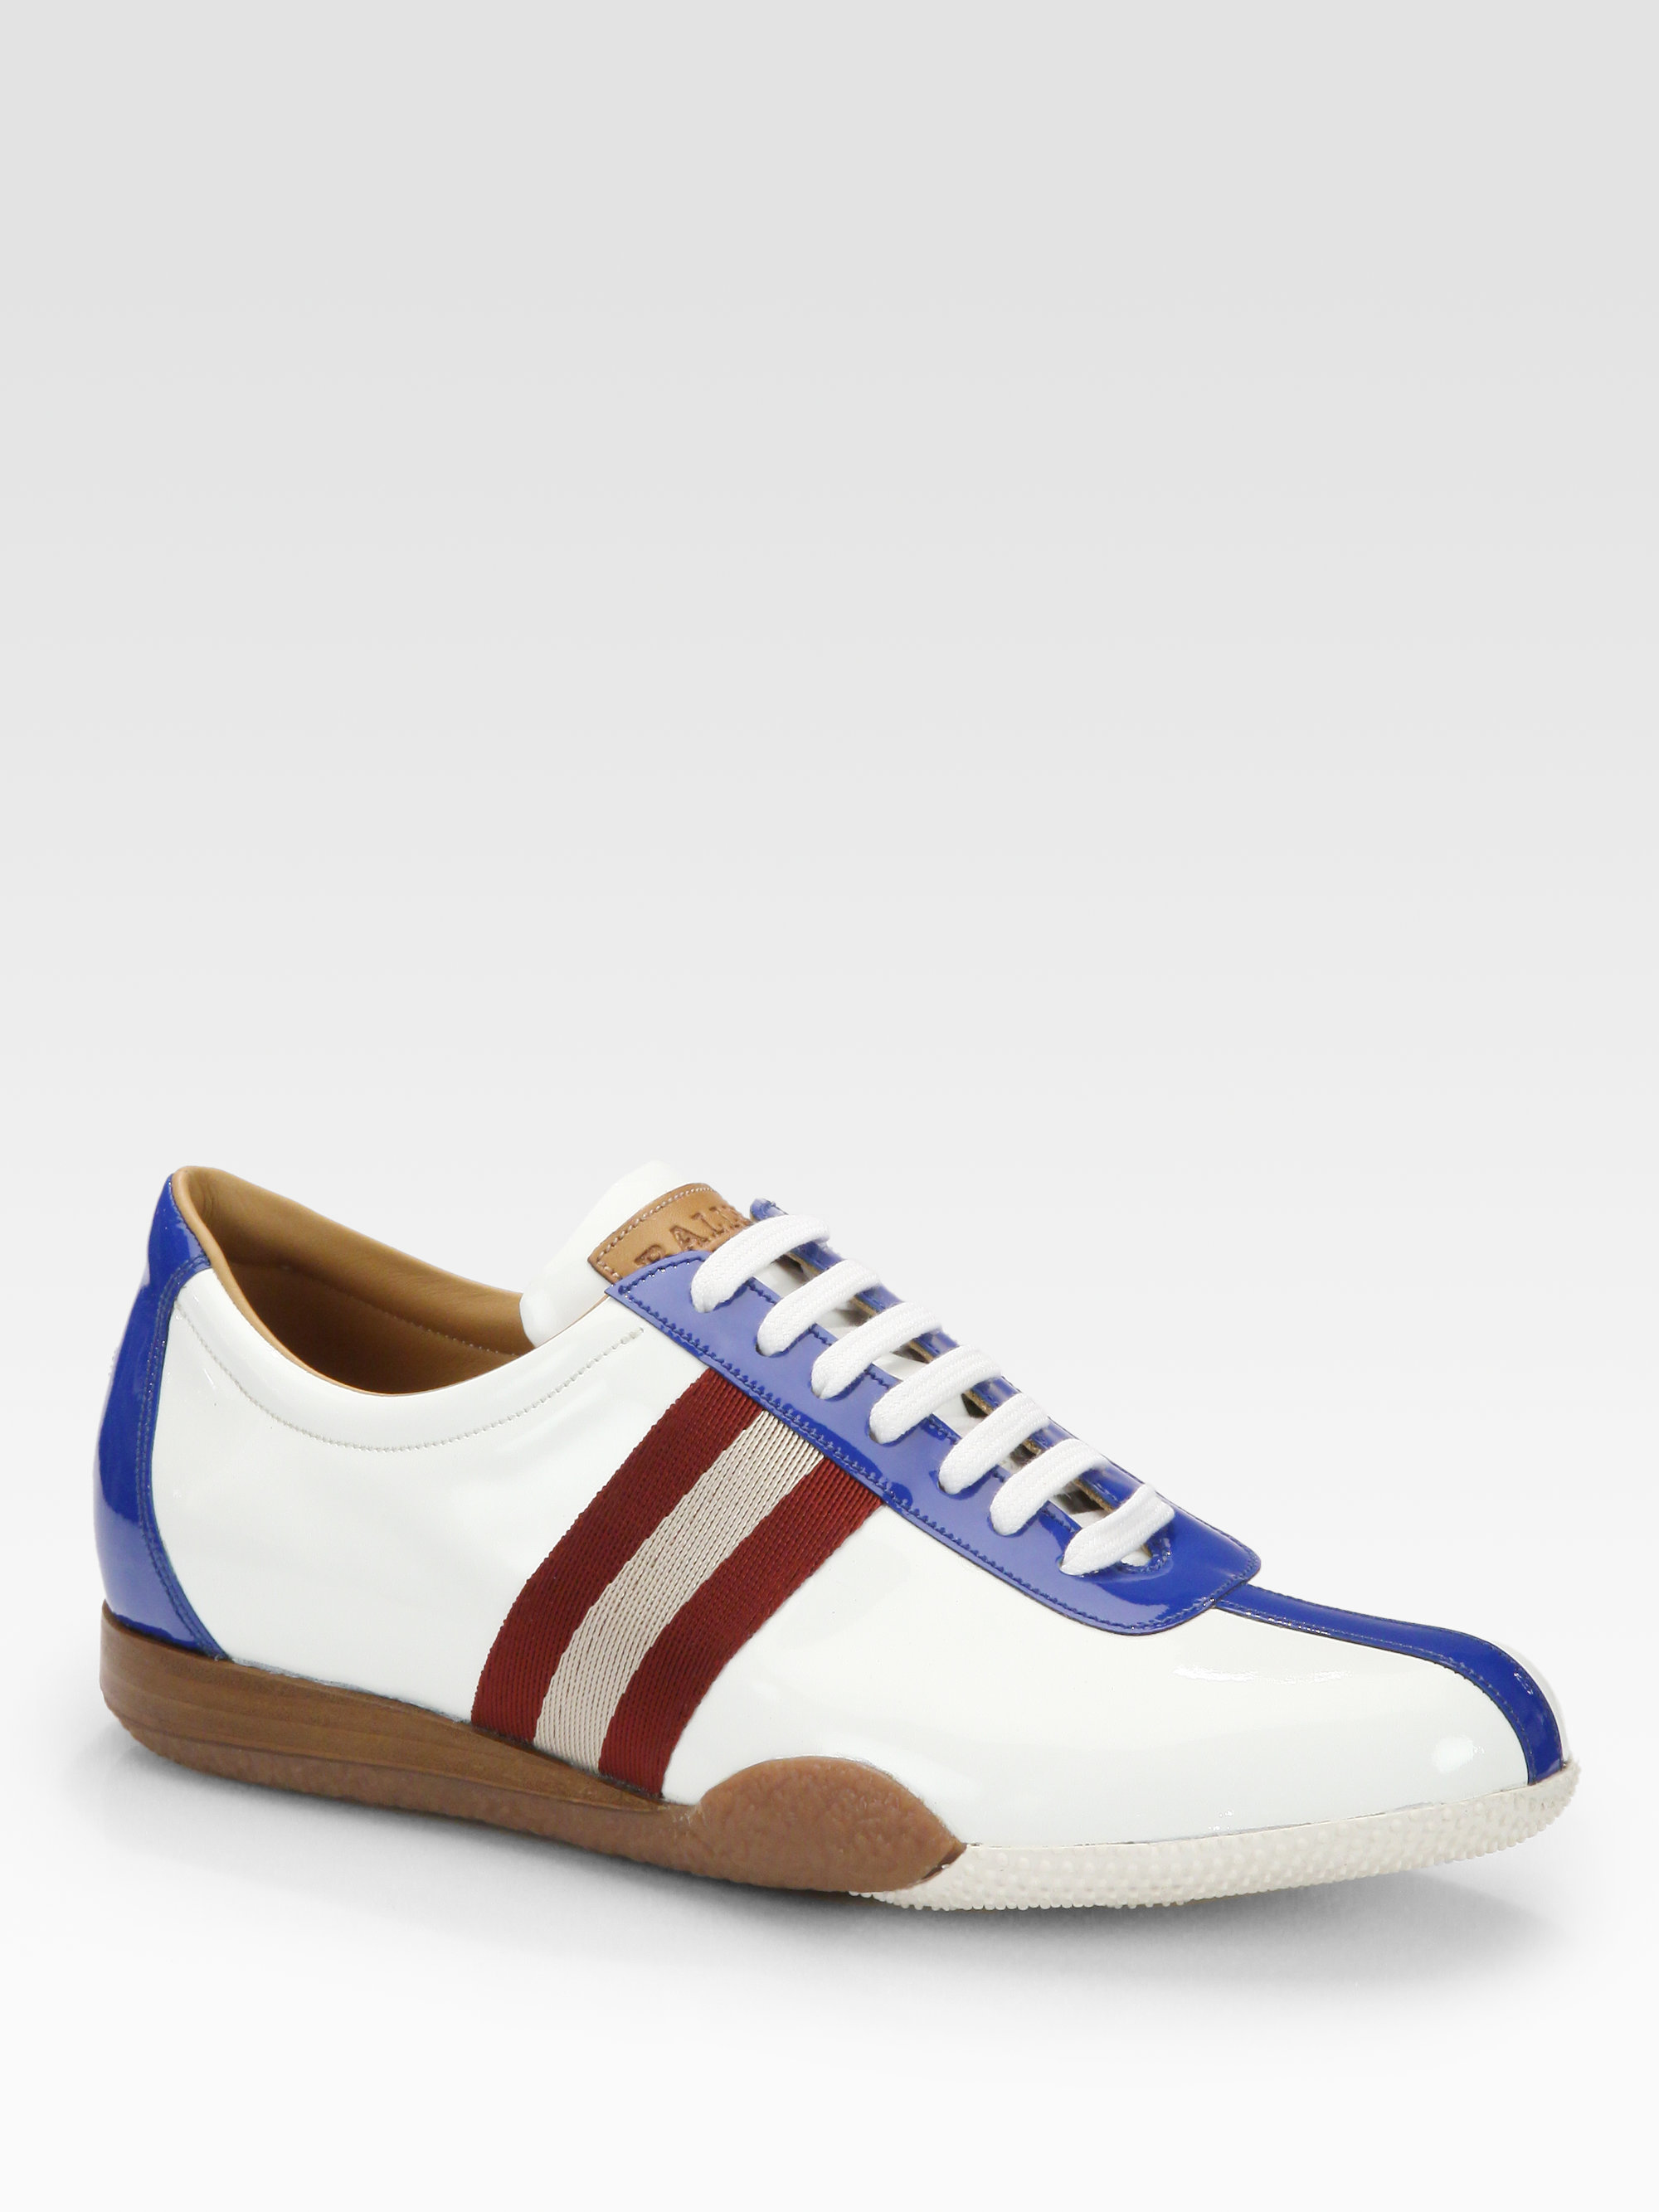 Lyst - Bally Freenew Patent Leather Sneakers in White for Men